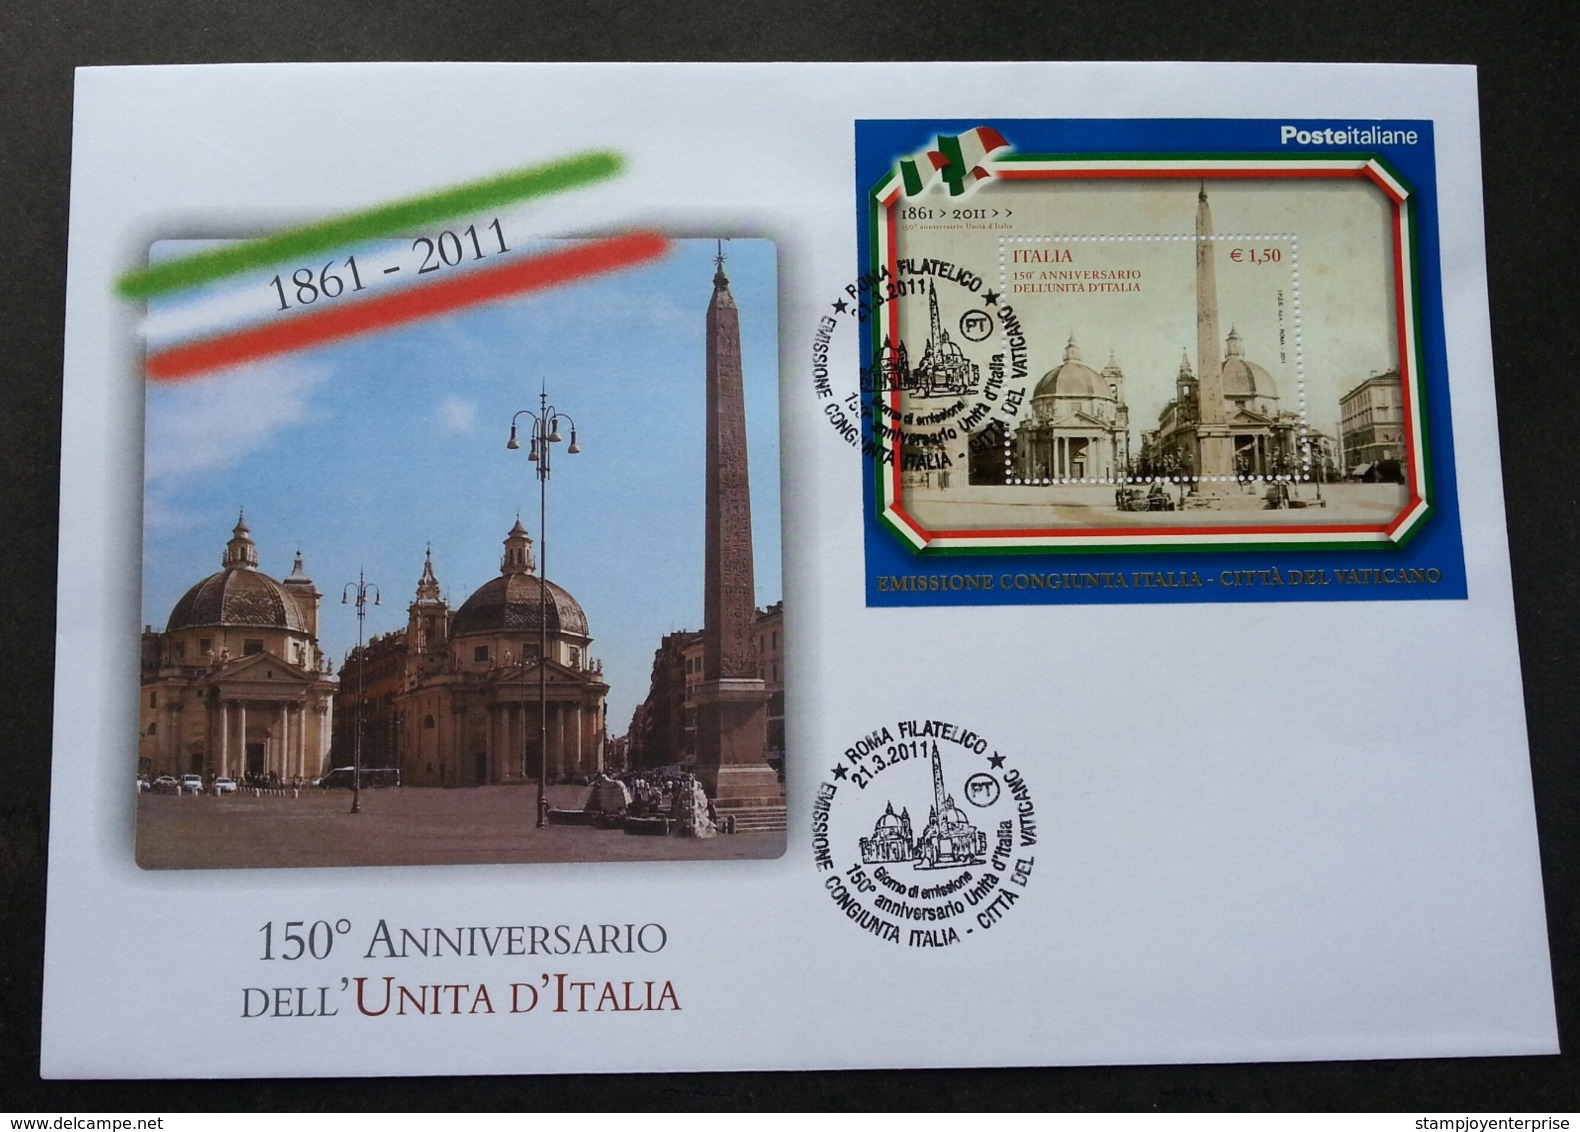 Italy - Vatican Joint Issue 150th Anniversary Of Italy Unity 2011 (miniature FDC) - FDC